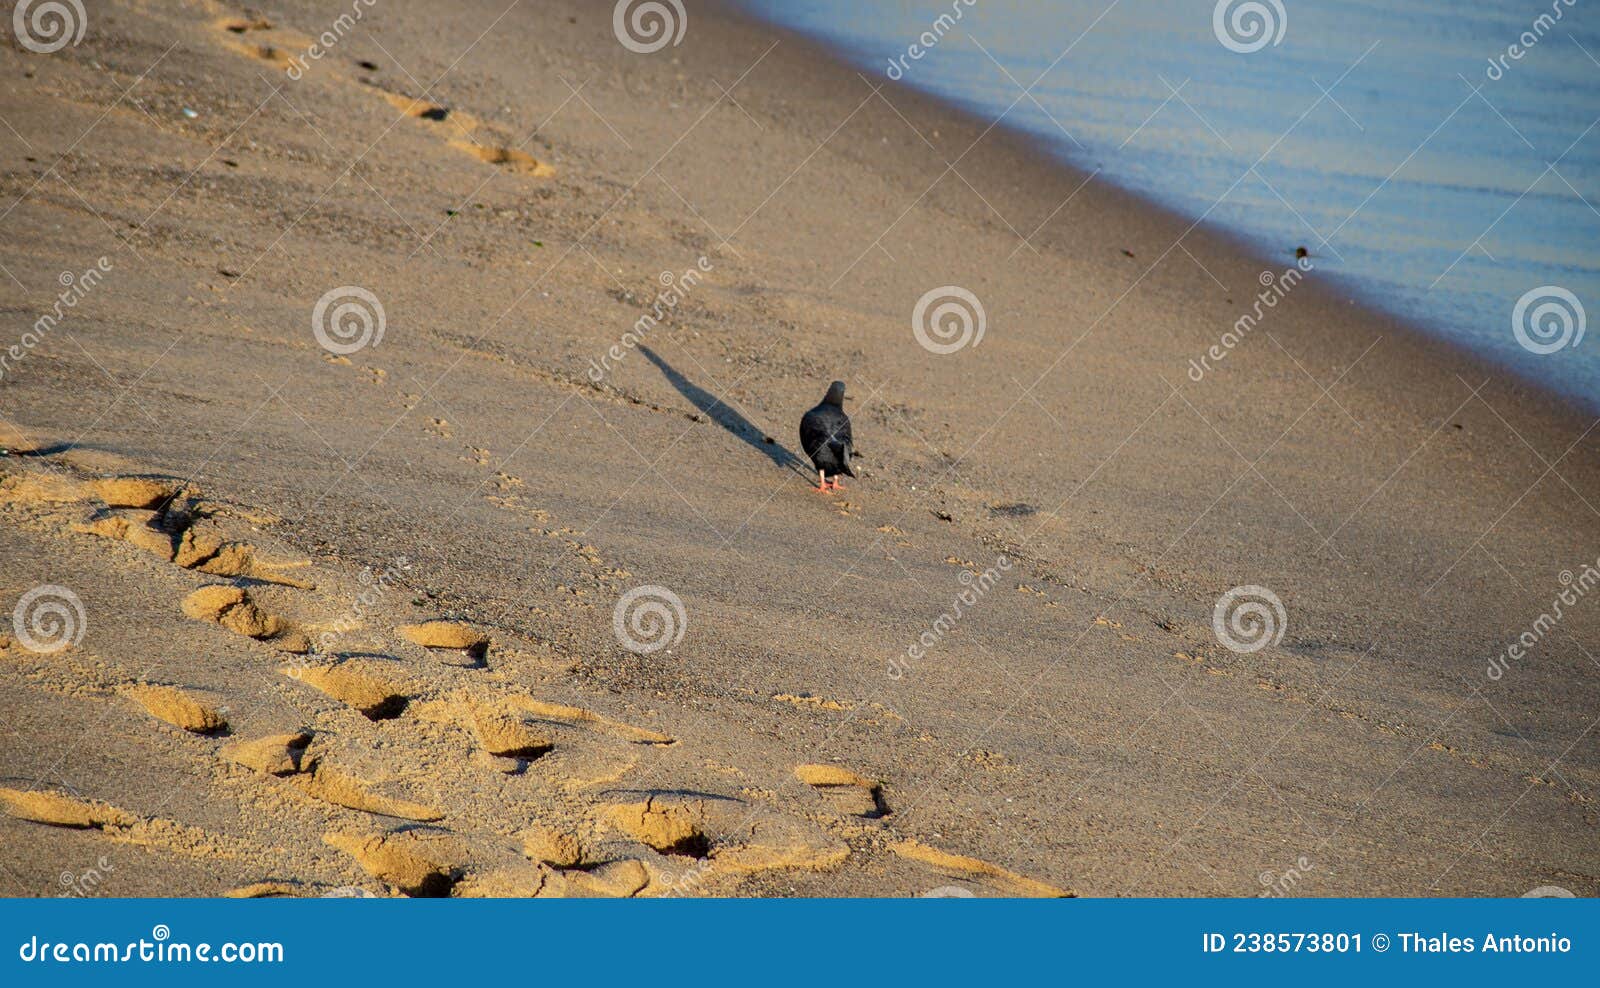 pigeon on the sand of paciencia beach